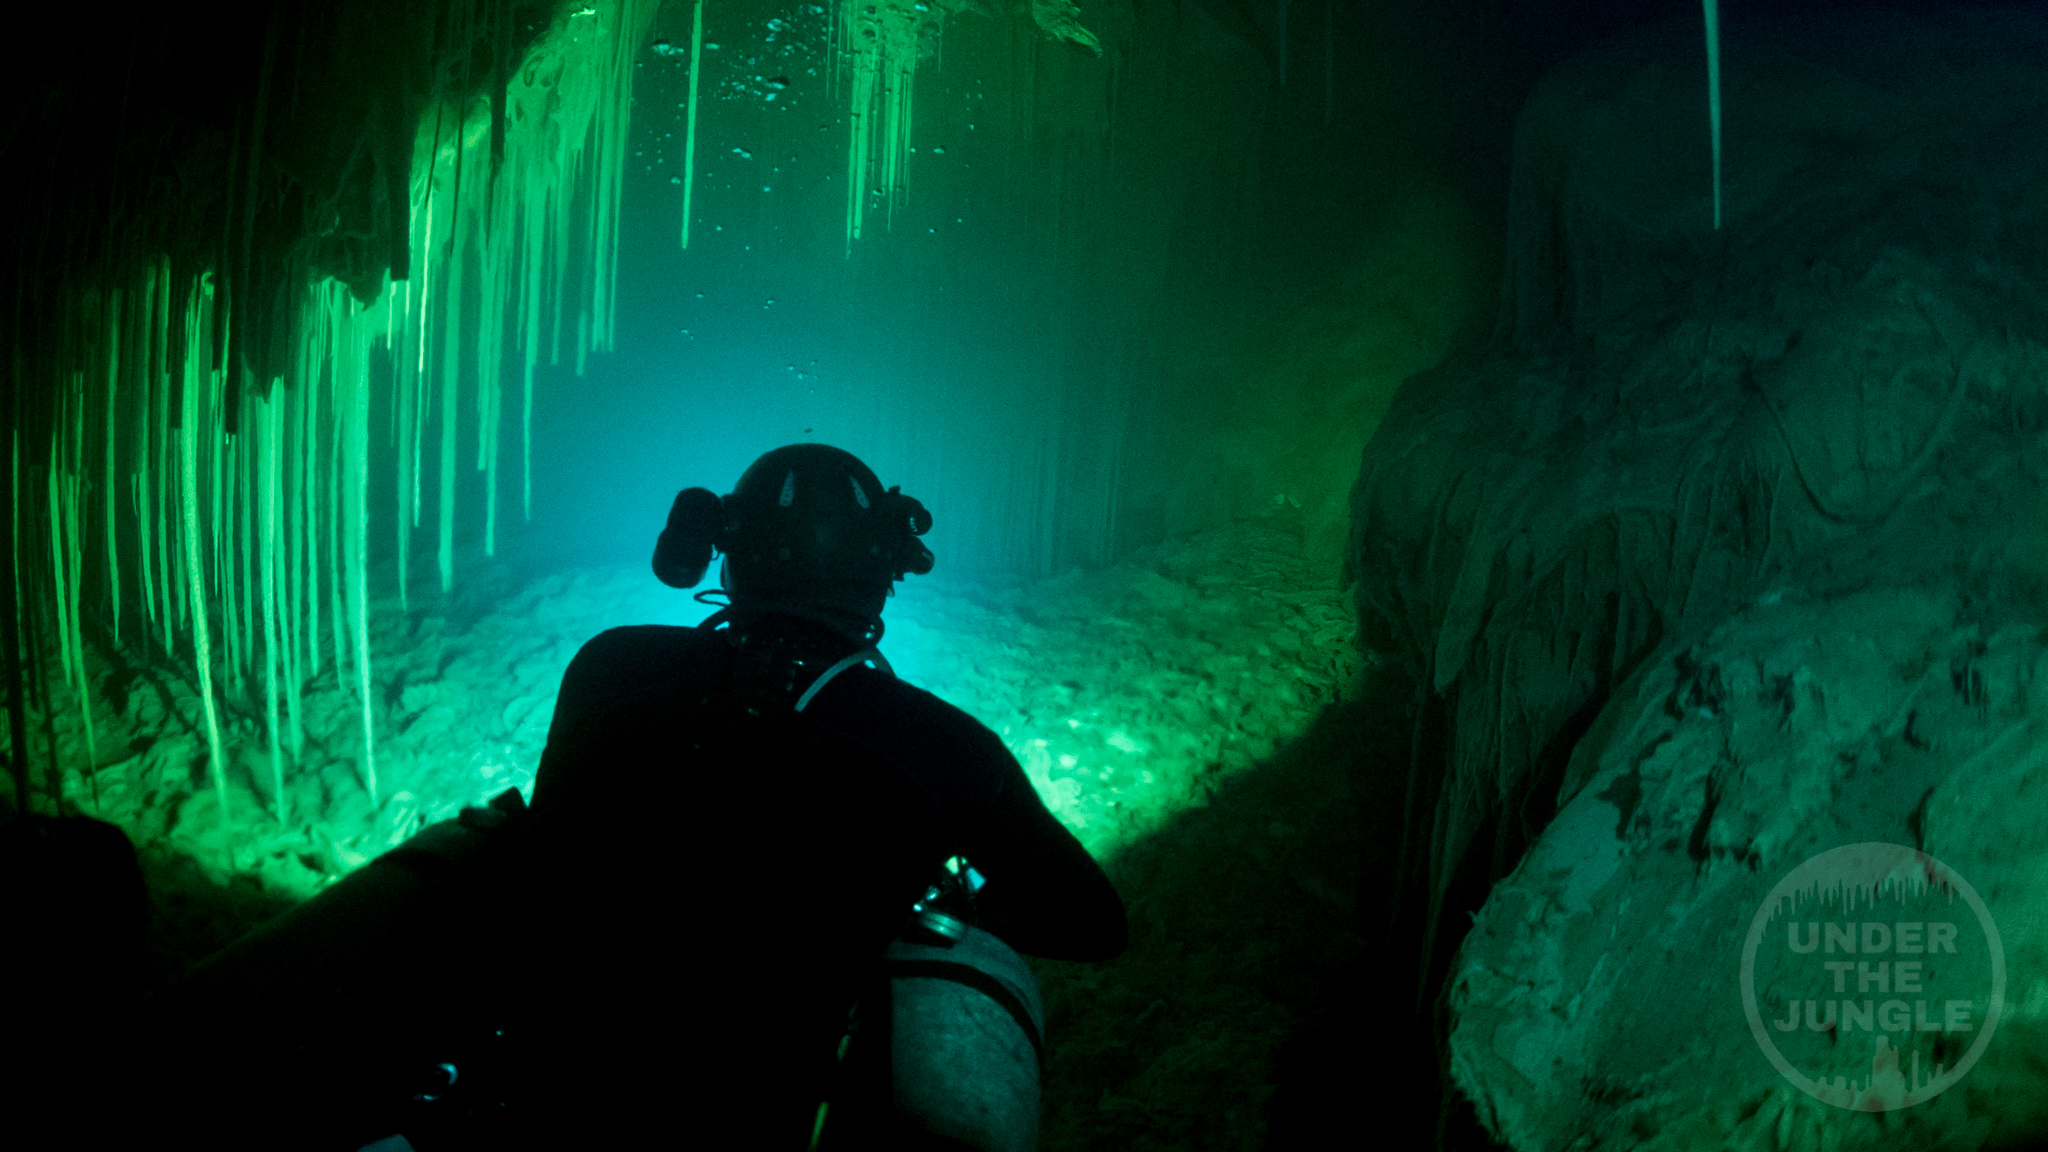 Under the Jungle, Pandora cave, Mexico Cave Exploration, Underwater Bacterial Straws, Rory O'Keefe